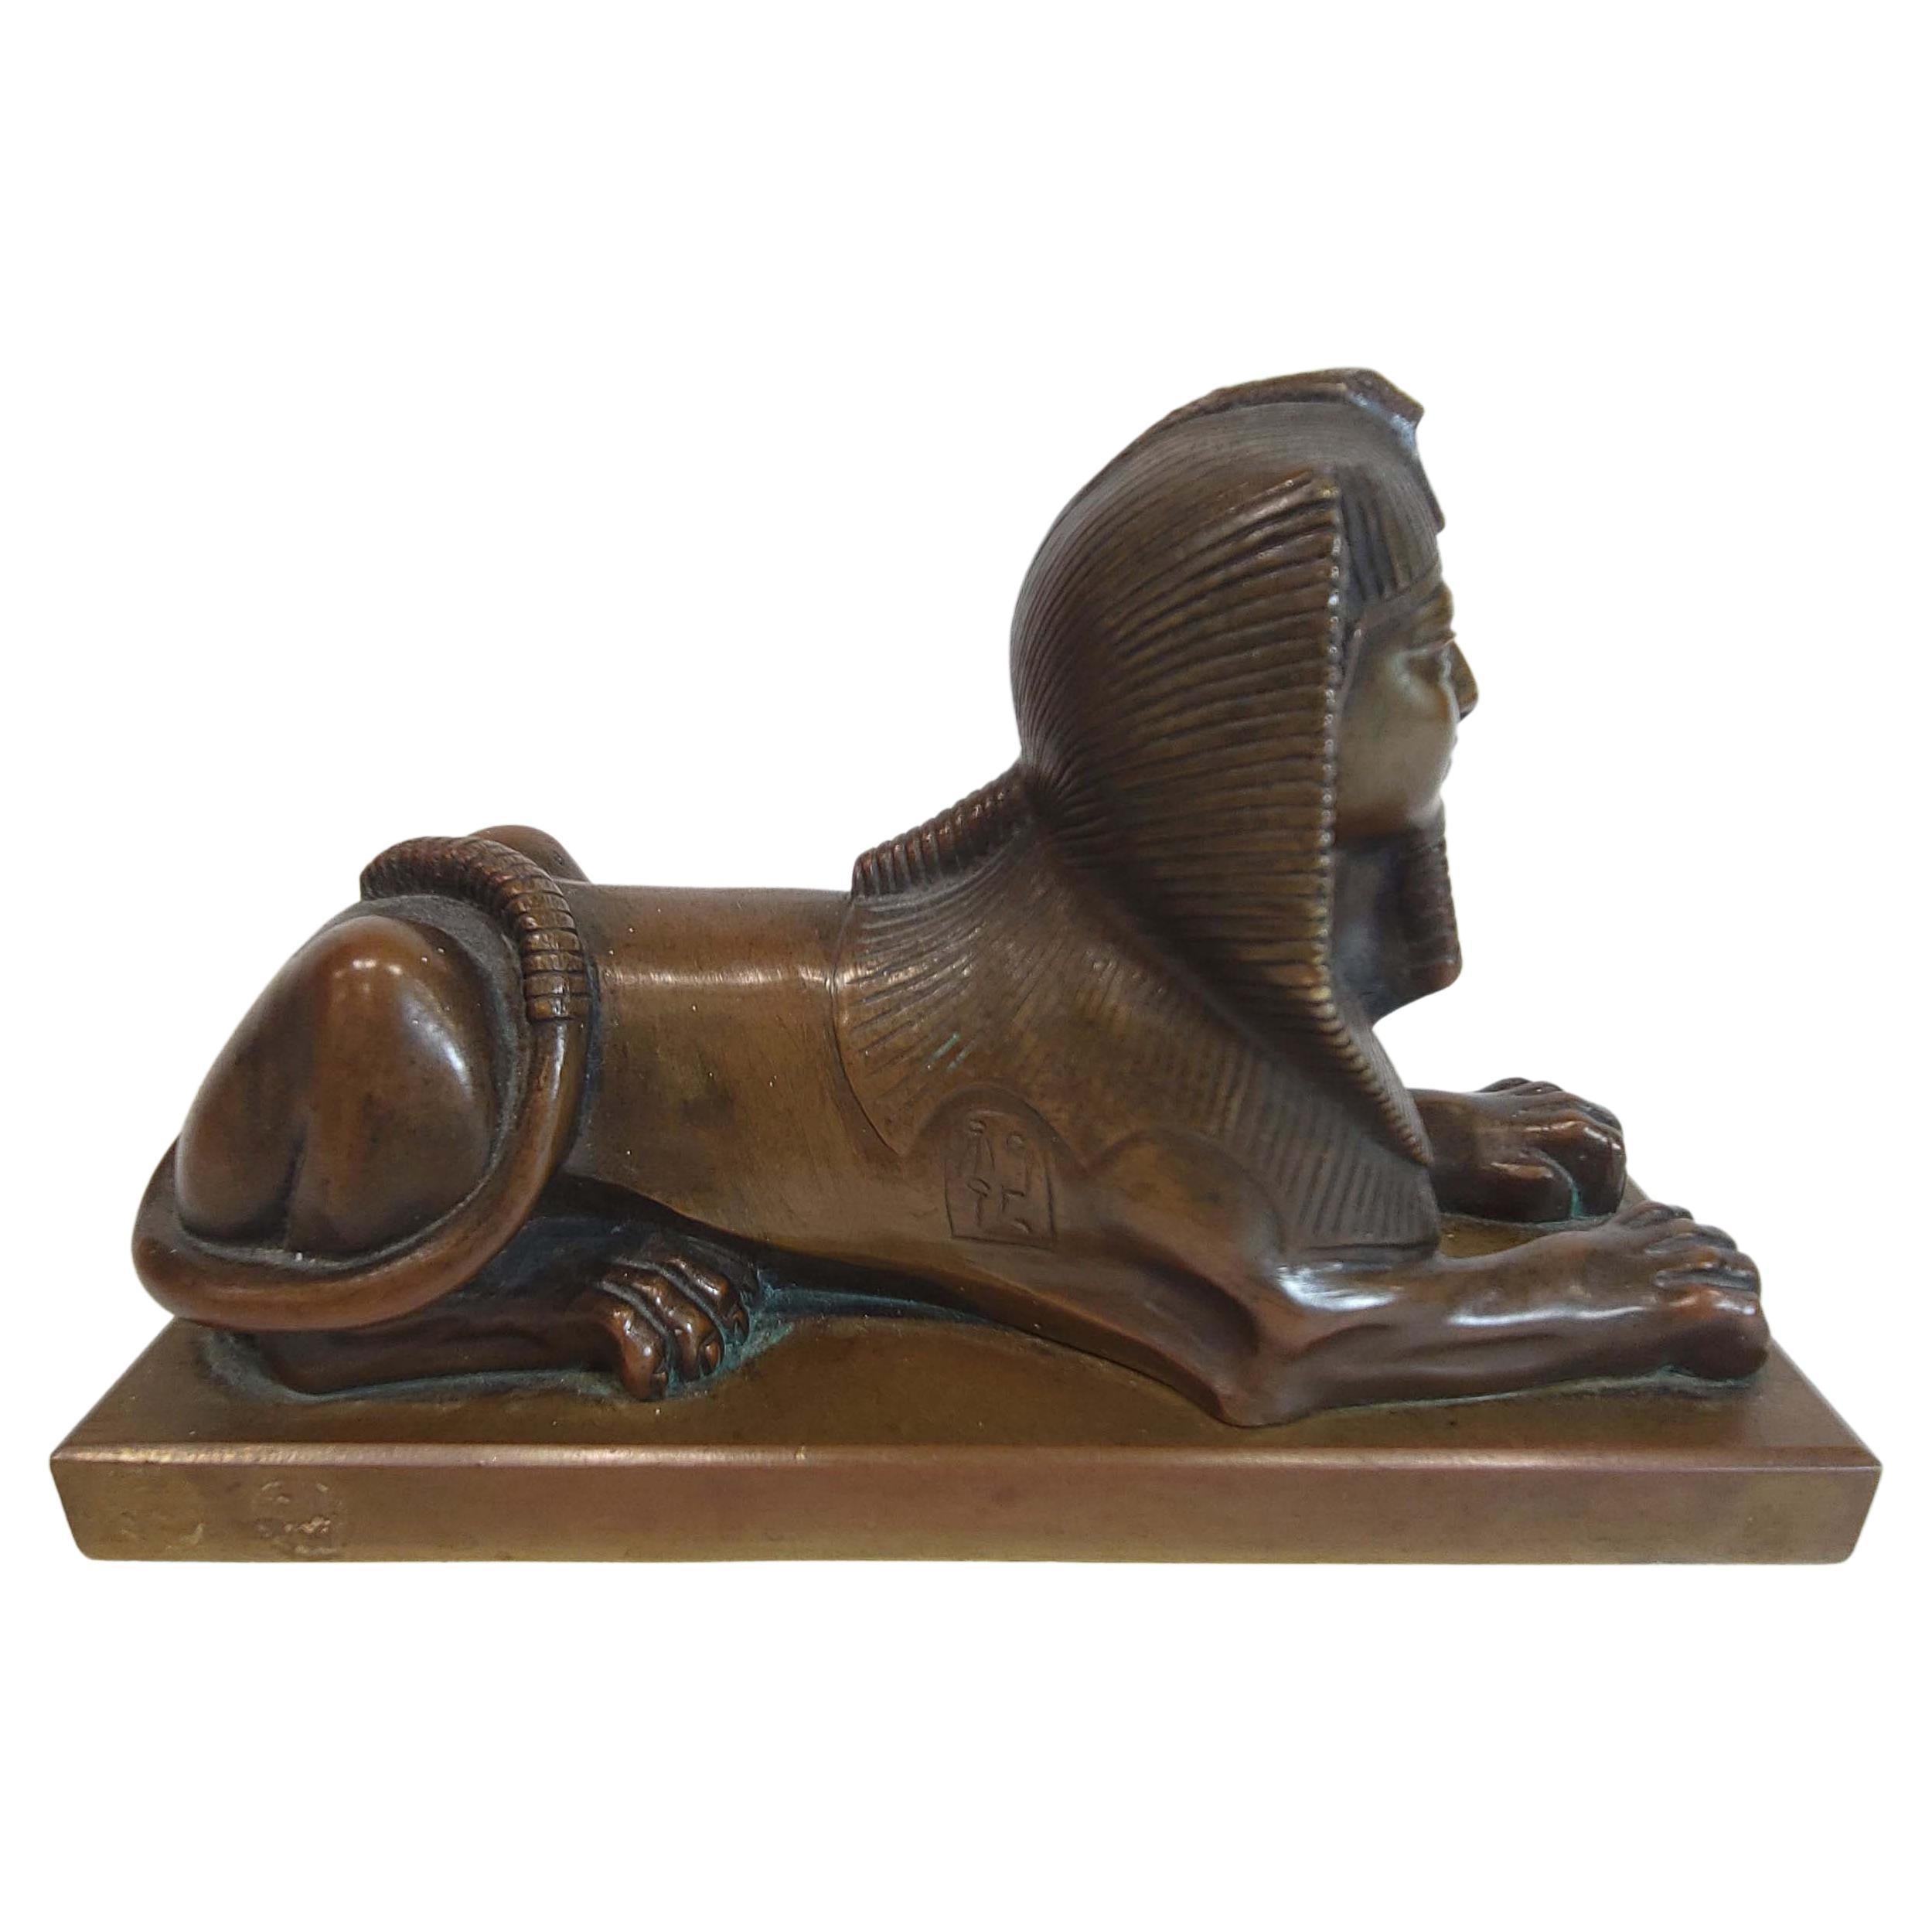 French Patinated Bronze Sphynx Sculpture 19C.